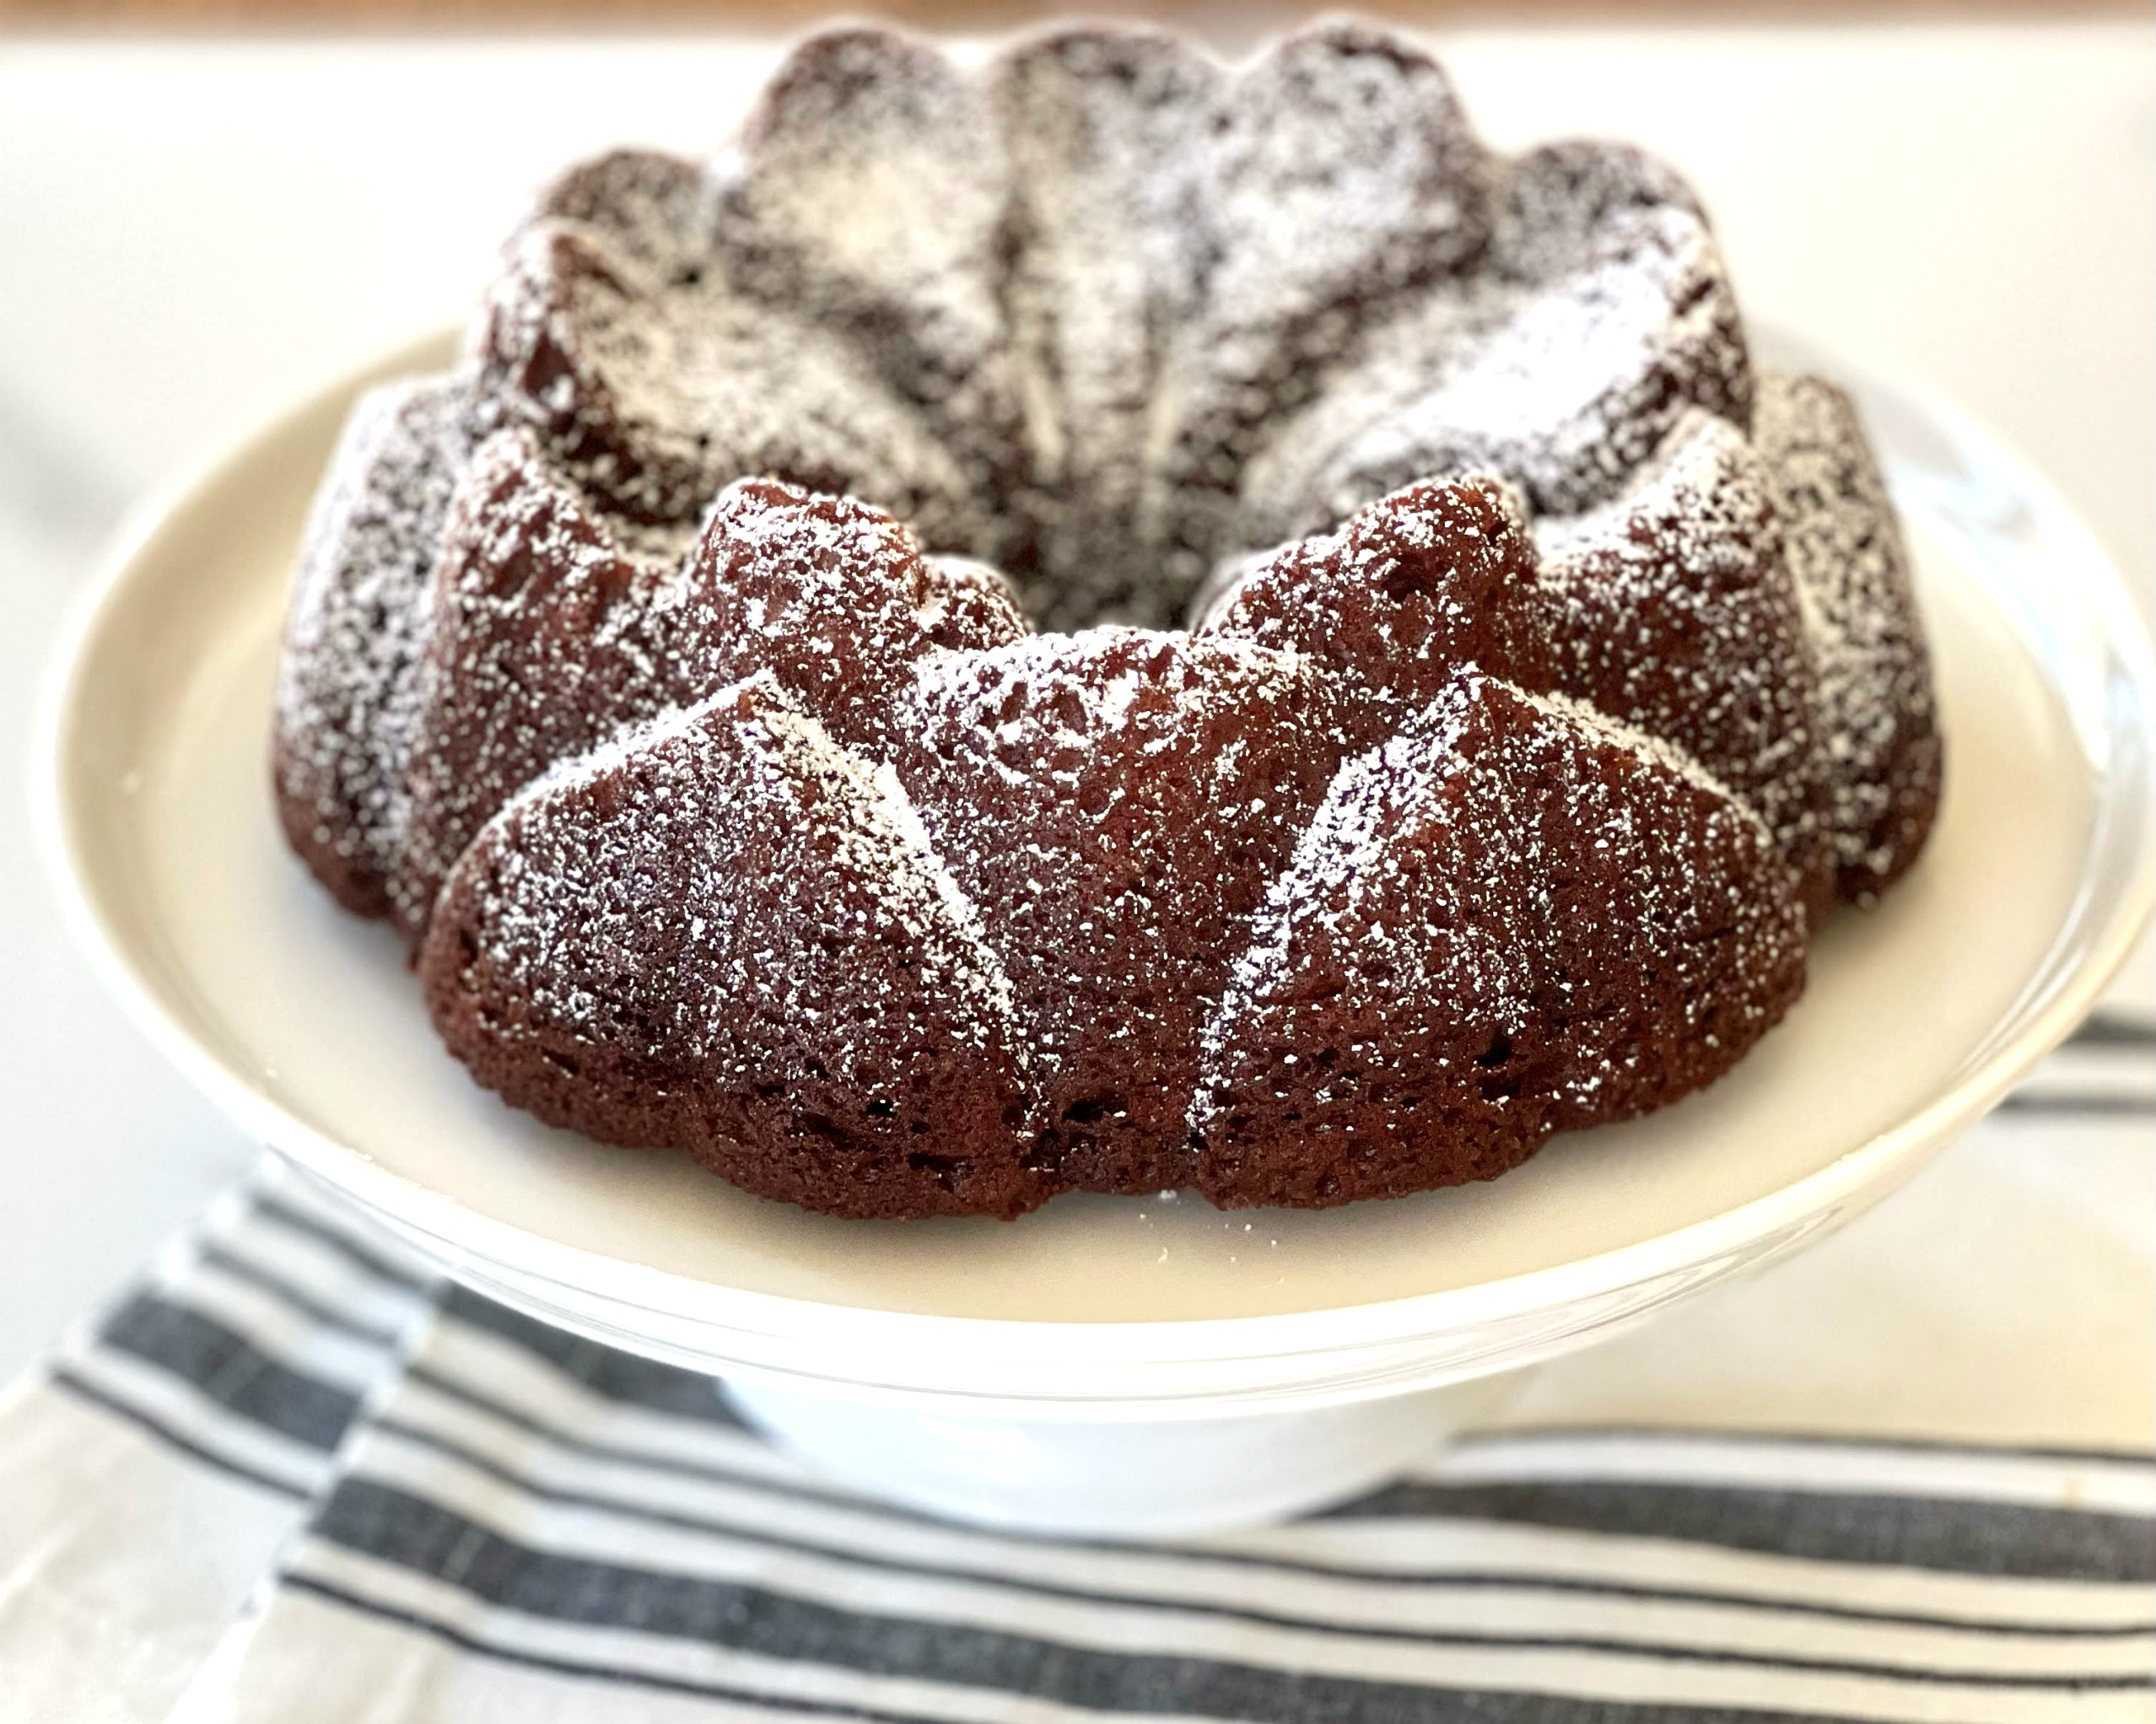 Chocolate Bundt Cake Recipe Pine Forest NordicWare Pan - Crafting a Family  Dinner